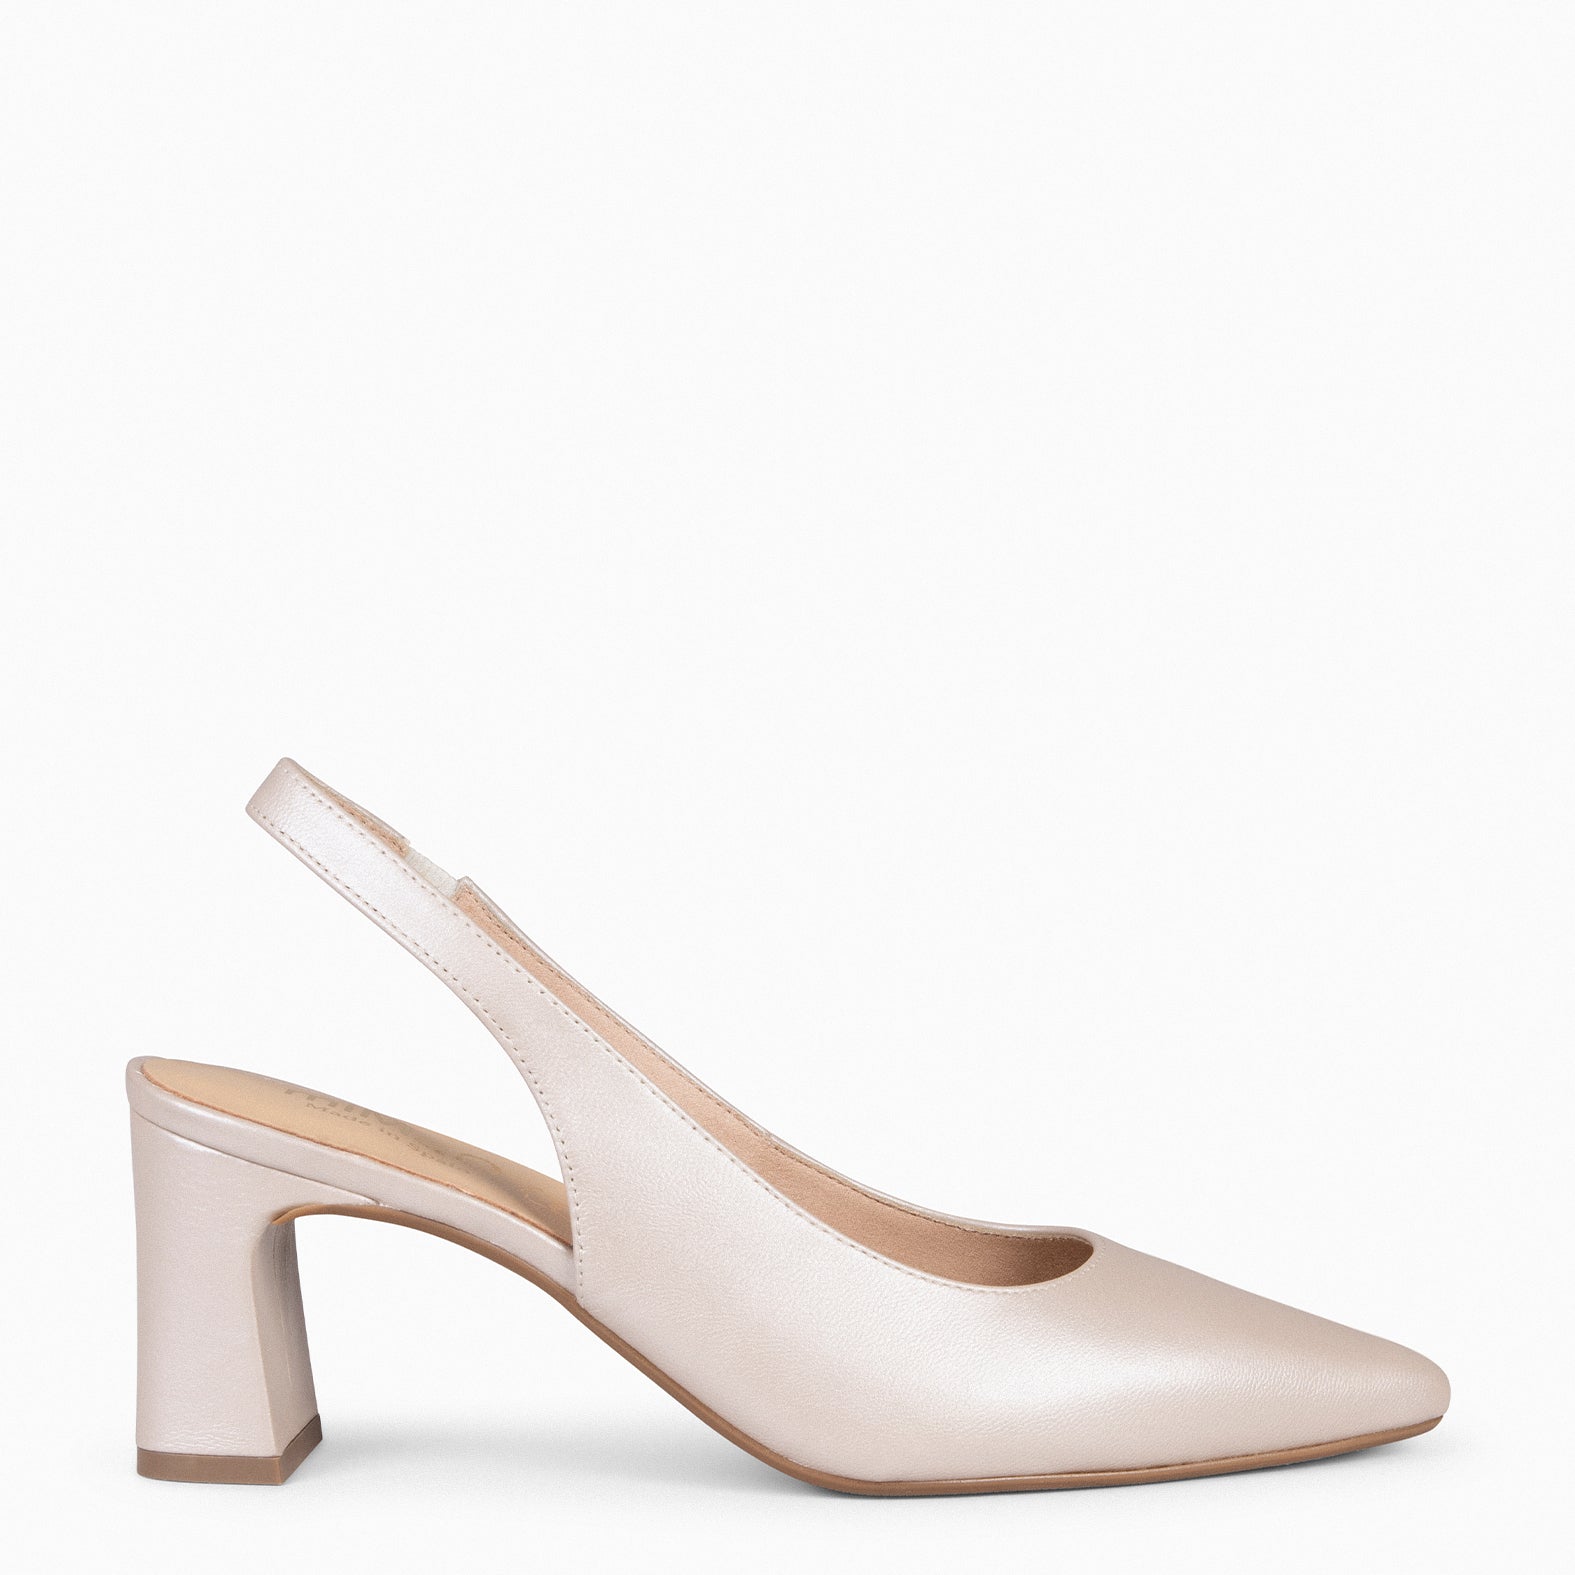 MIRIAM – PEARLY TAUPE BRIDAL SLINGBACK